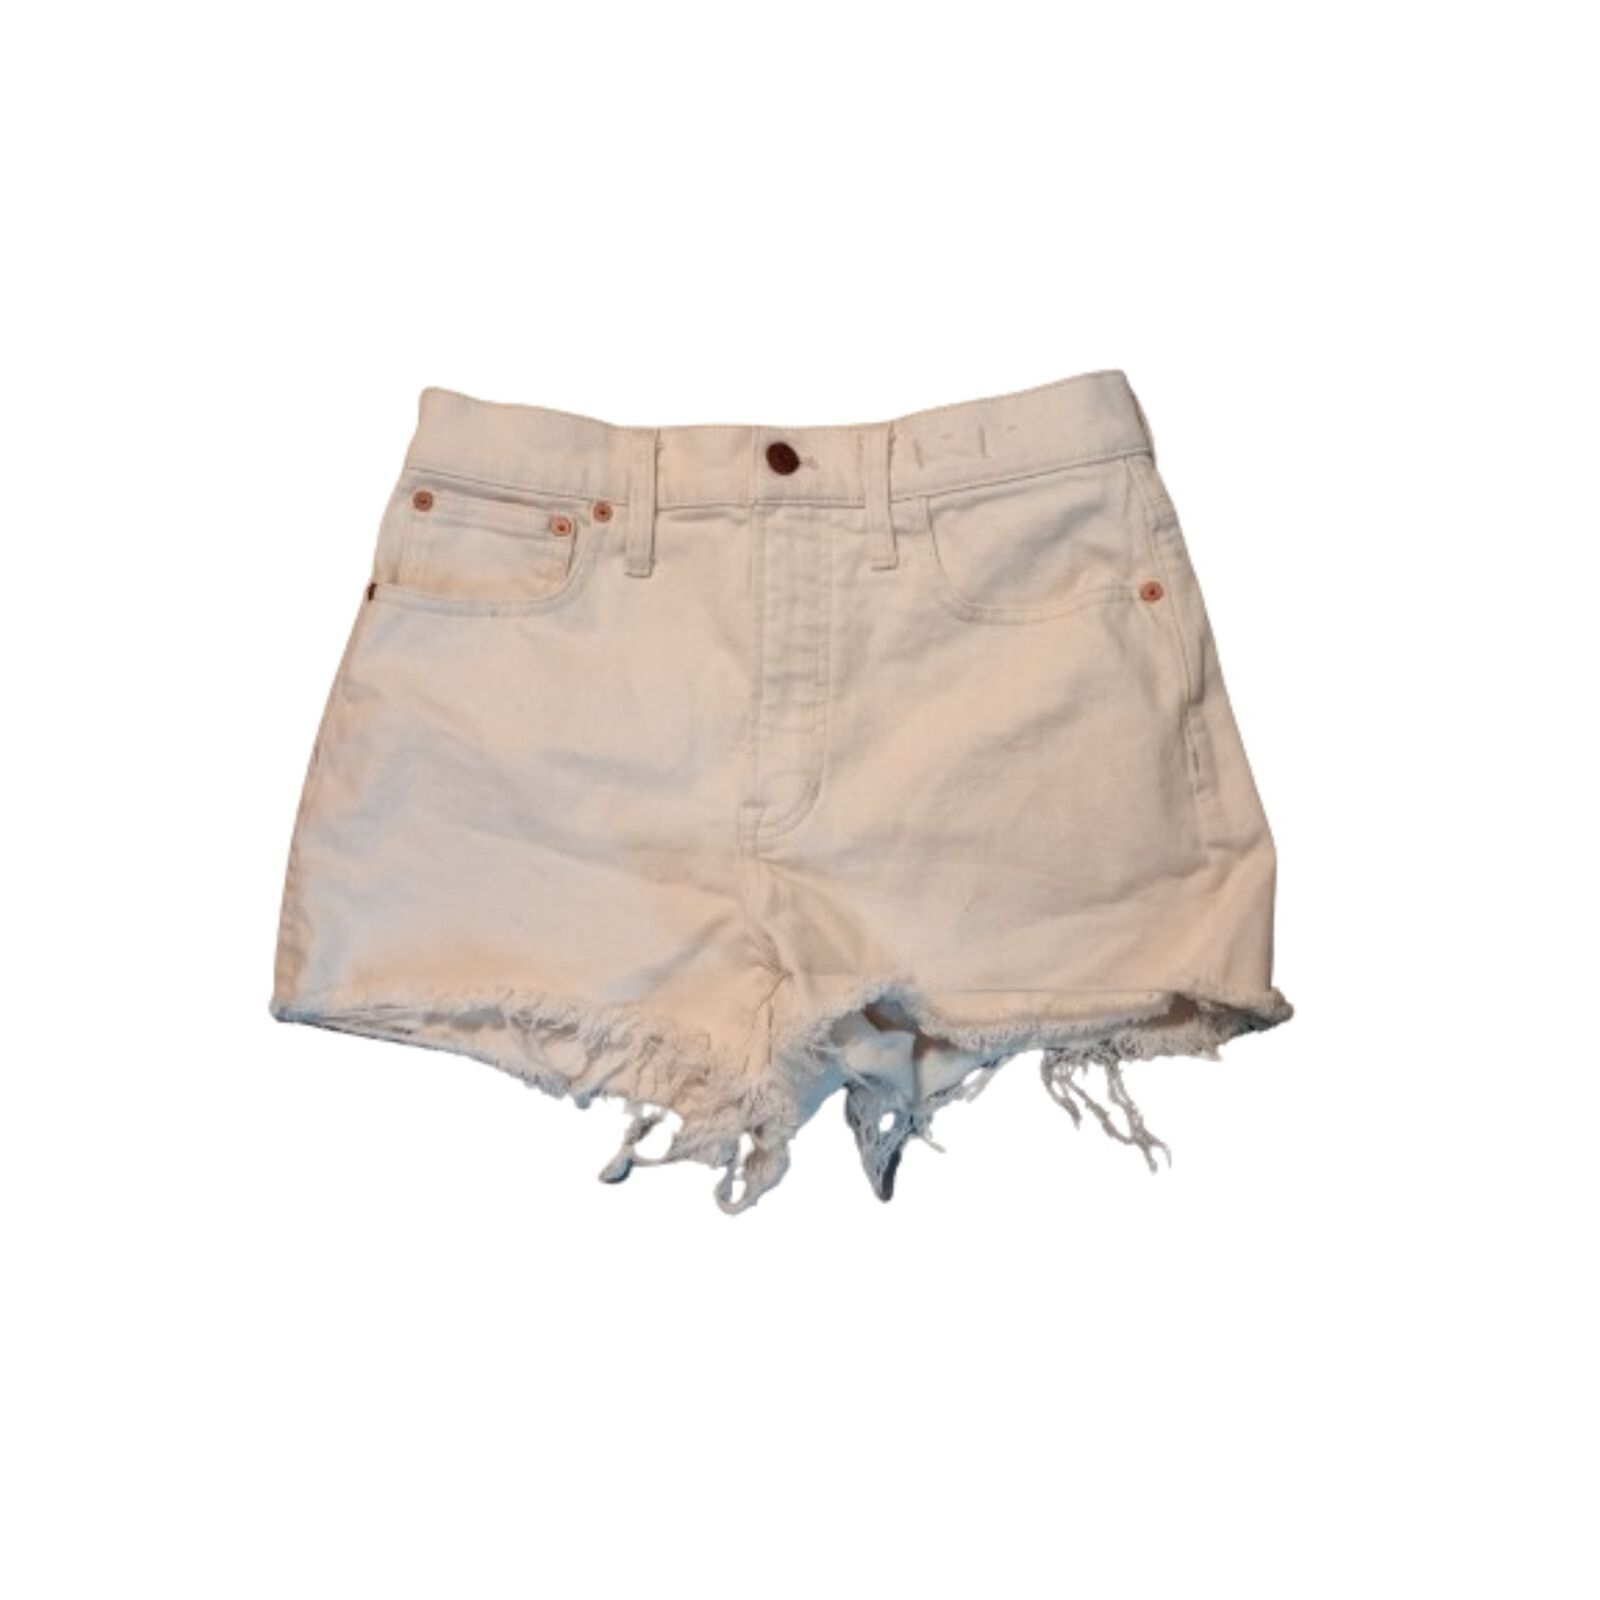 Primary image for Madewell Women's Size 27 (6), "The Perfect Fit Jean Shorts"